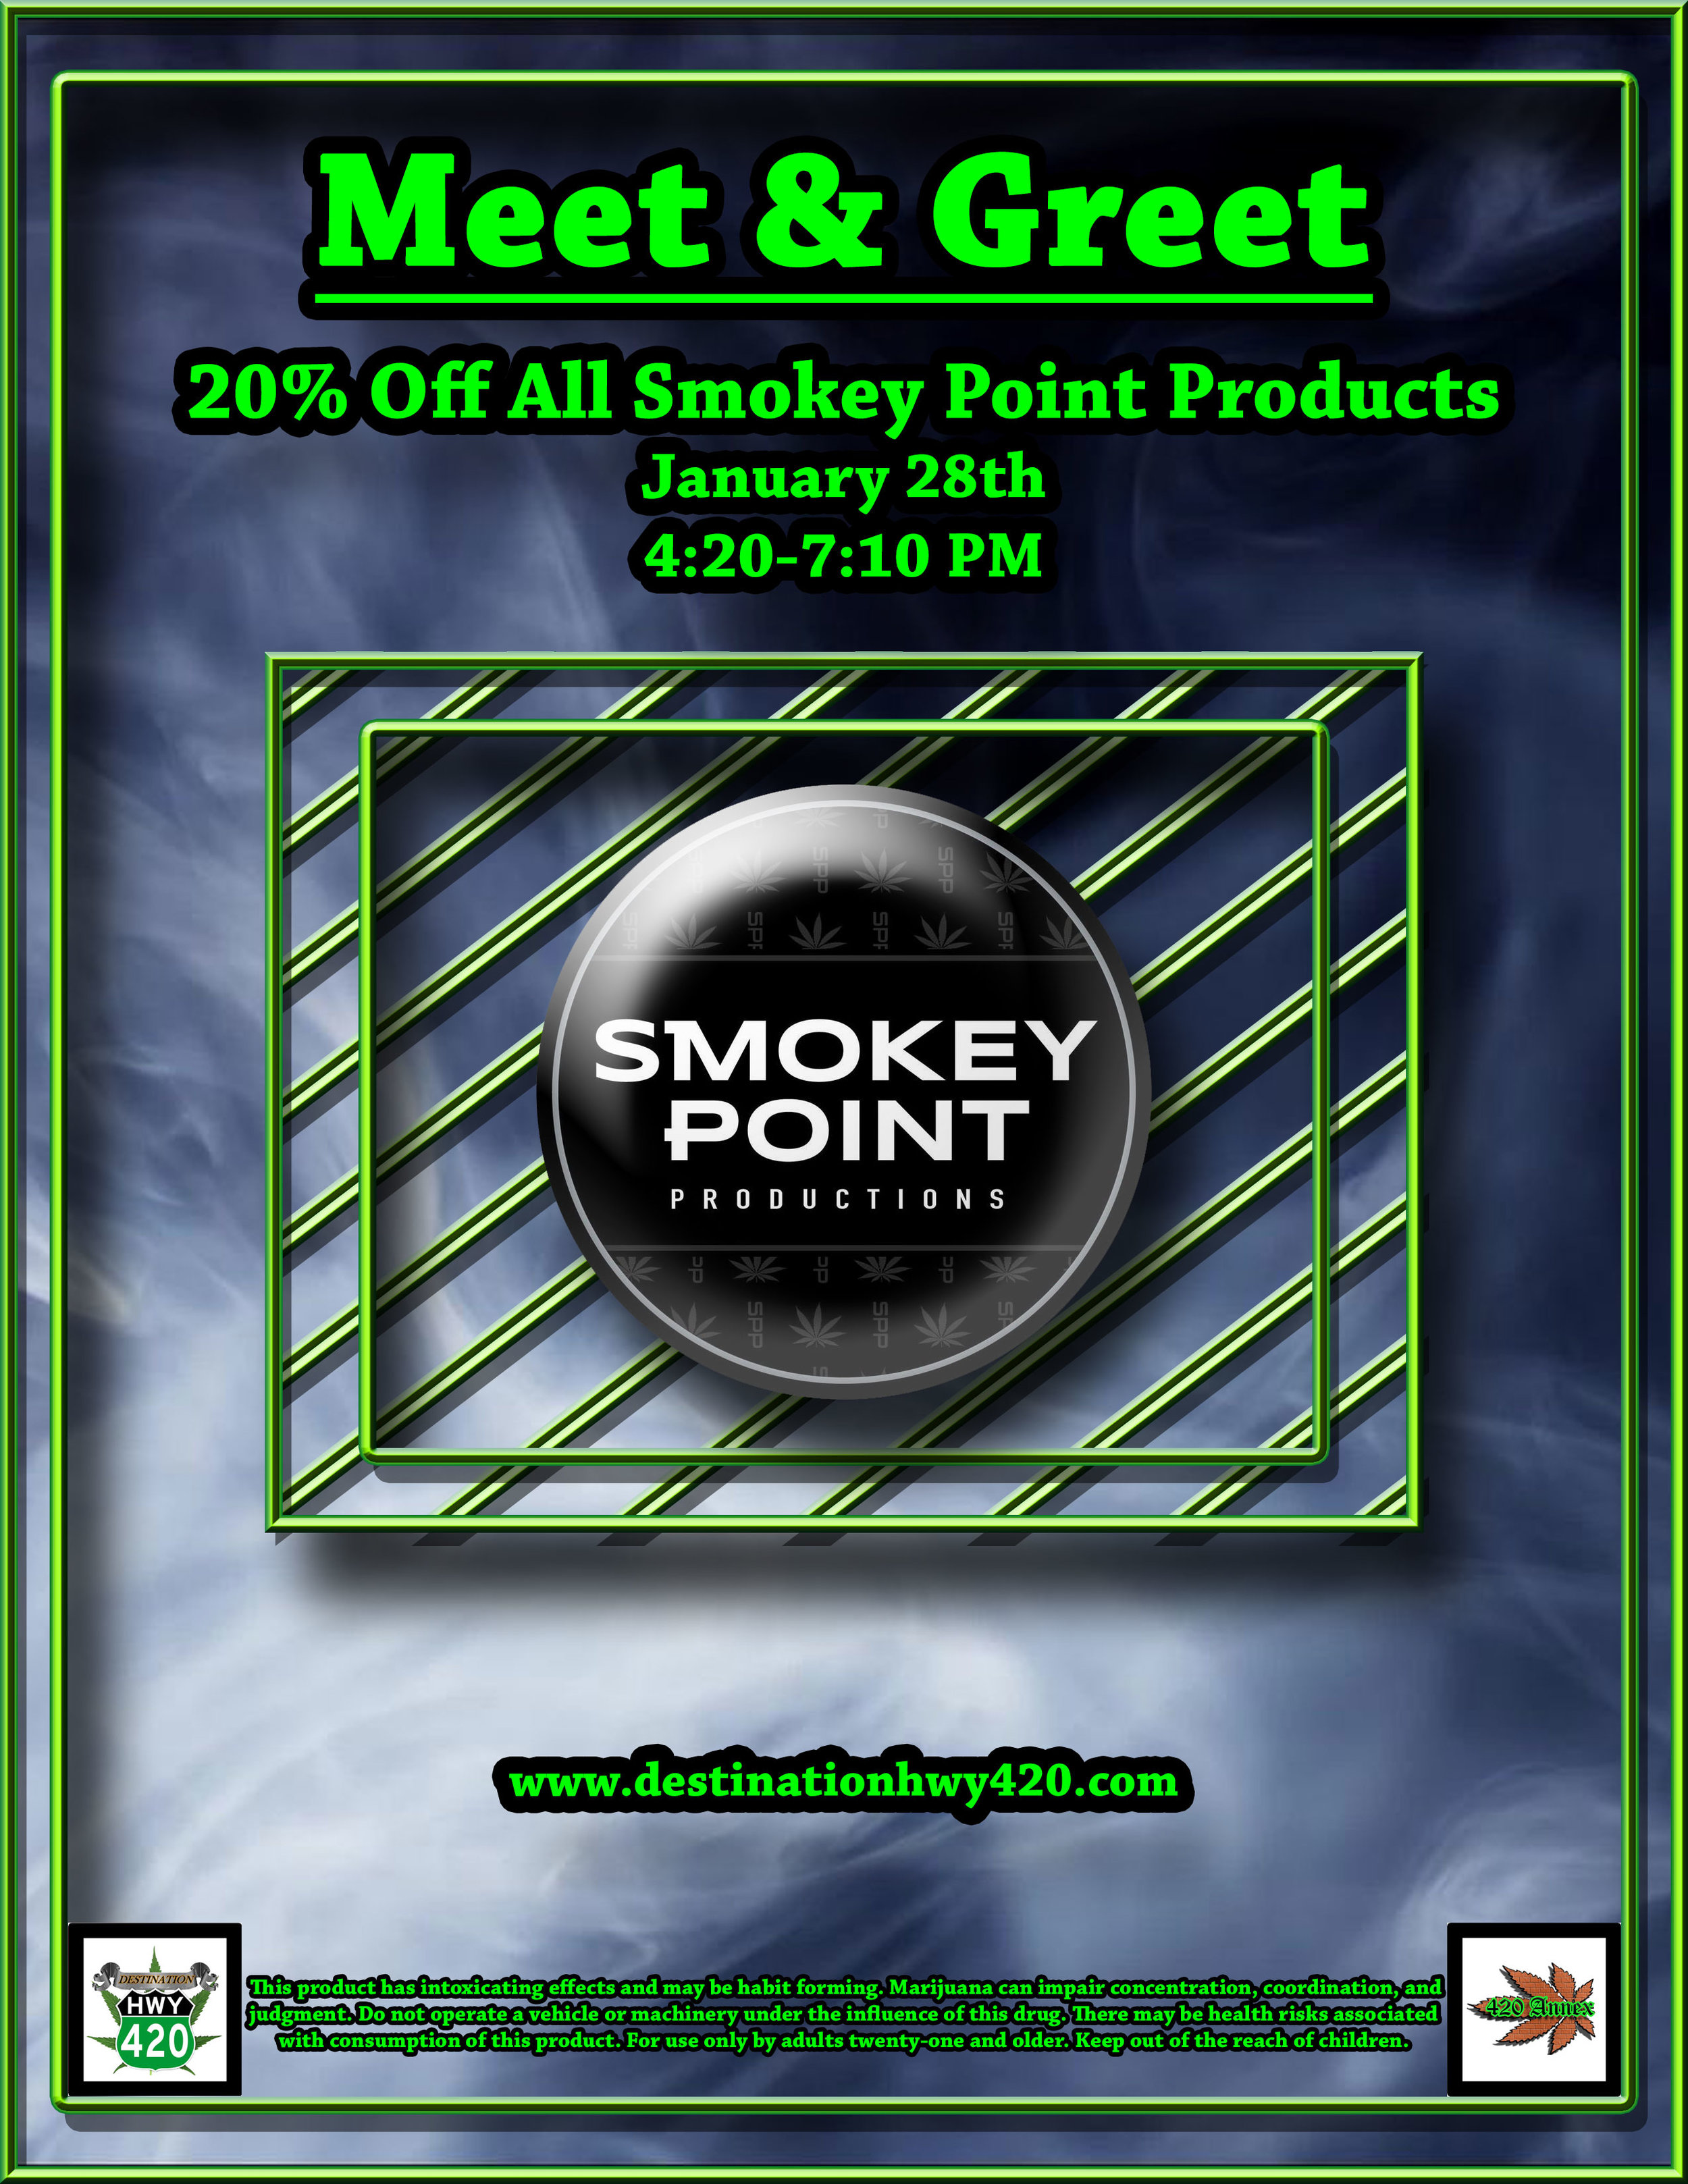 Smokey Point Productions, a marijuana producer/processor from Arlington, WA will be visiting Destination HWY 420 for a Meet &amp; Greet. SPP offers amazing cannabis products for great prices, such as: Flower, Infused Prerolled Joints, Vape Cartridges, Concentrates, and Edibles. Come visit us in East Bremerton to learn more!